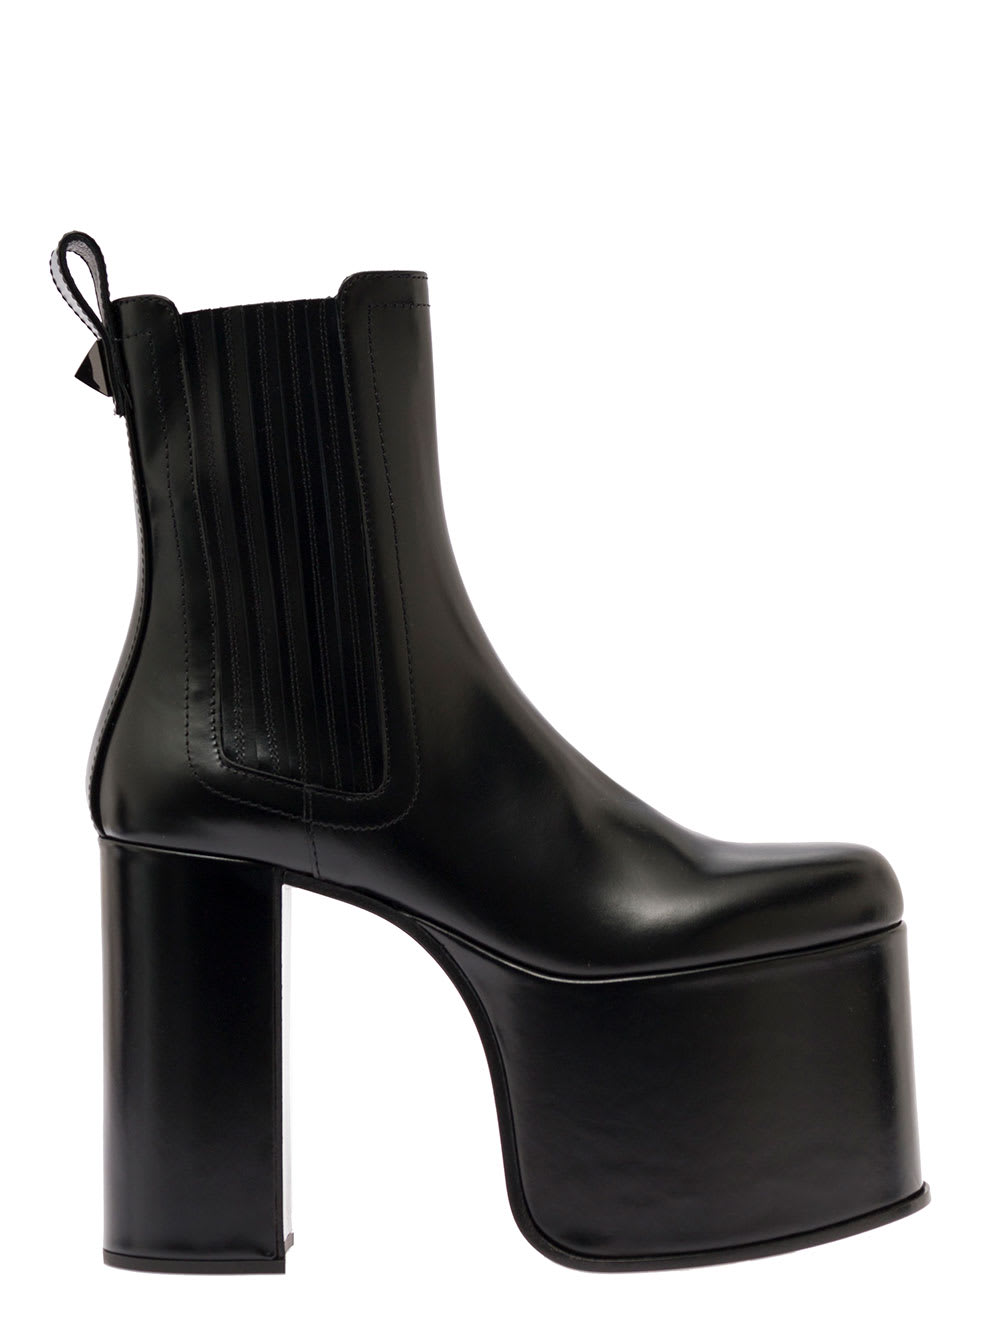 Club Black Platform Ankle Boot With Maxi Stud Detail In Leather Woman Valentino Garavani